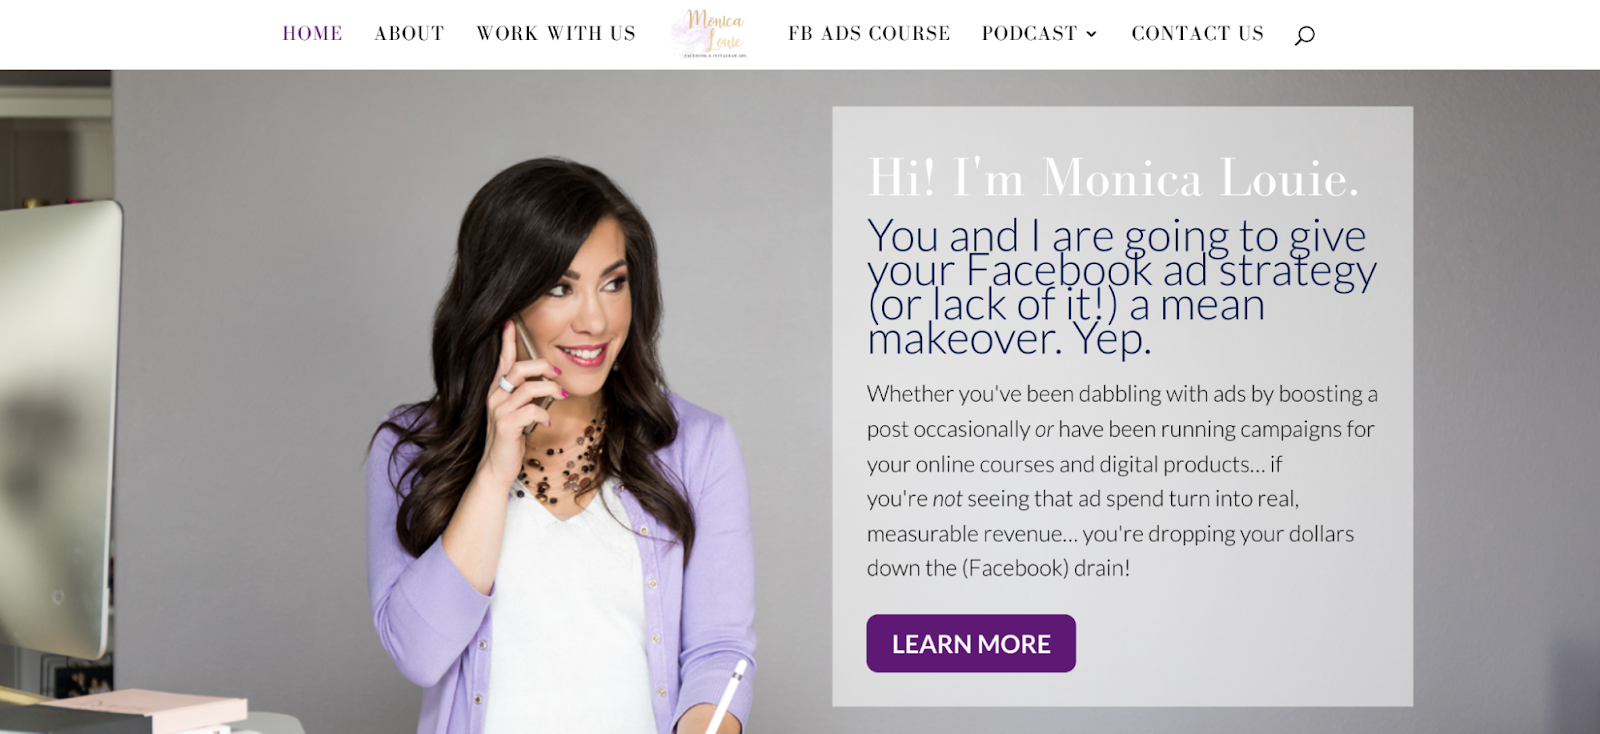 Monica Louie’s consulting website. An example of how consulting can be a lucrative online business idea.